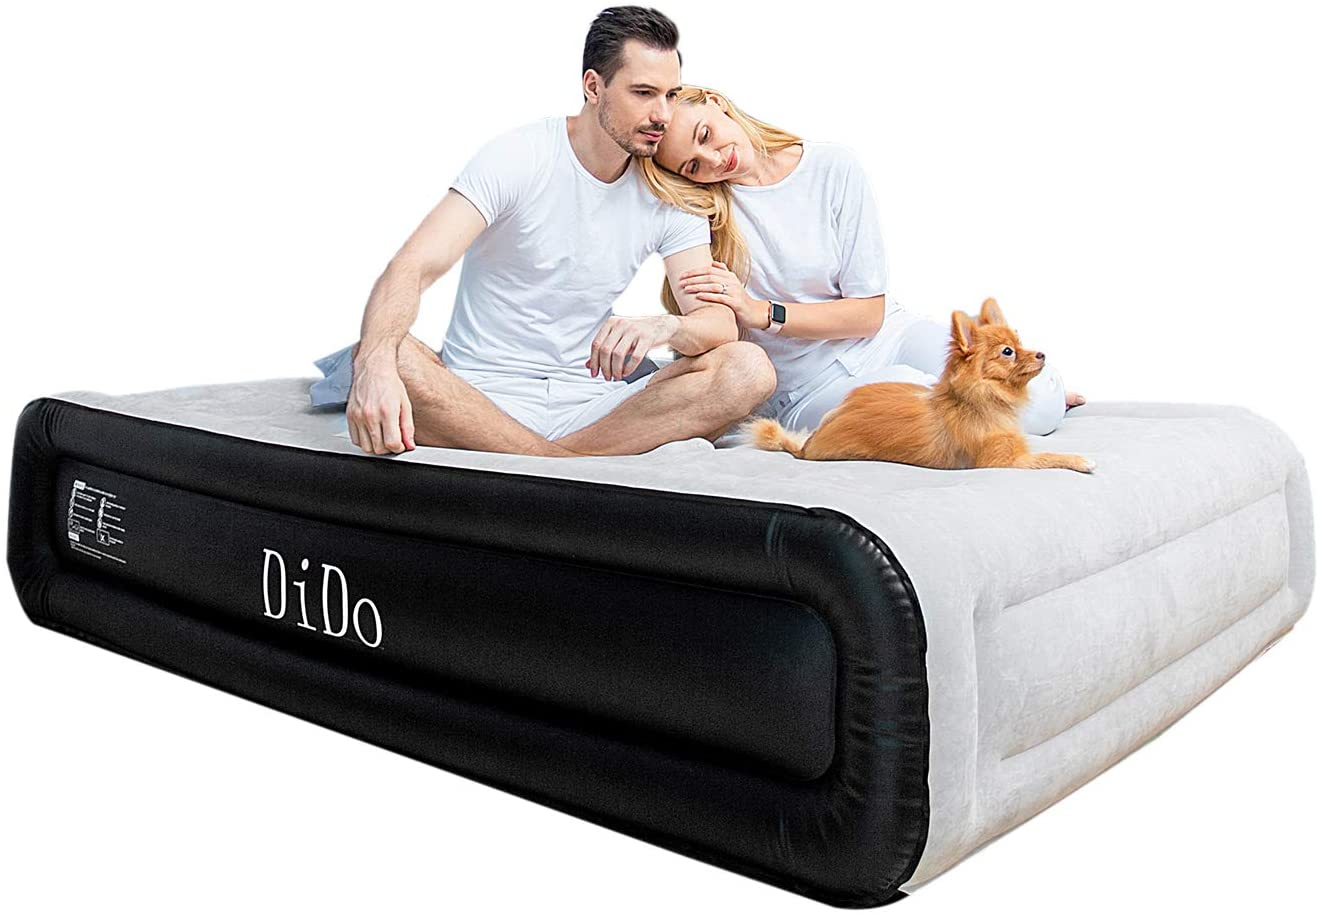 Air bed prices for double-depth air beds  are higher.